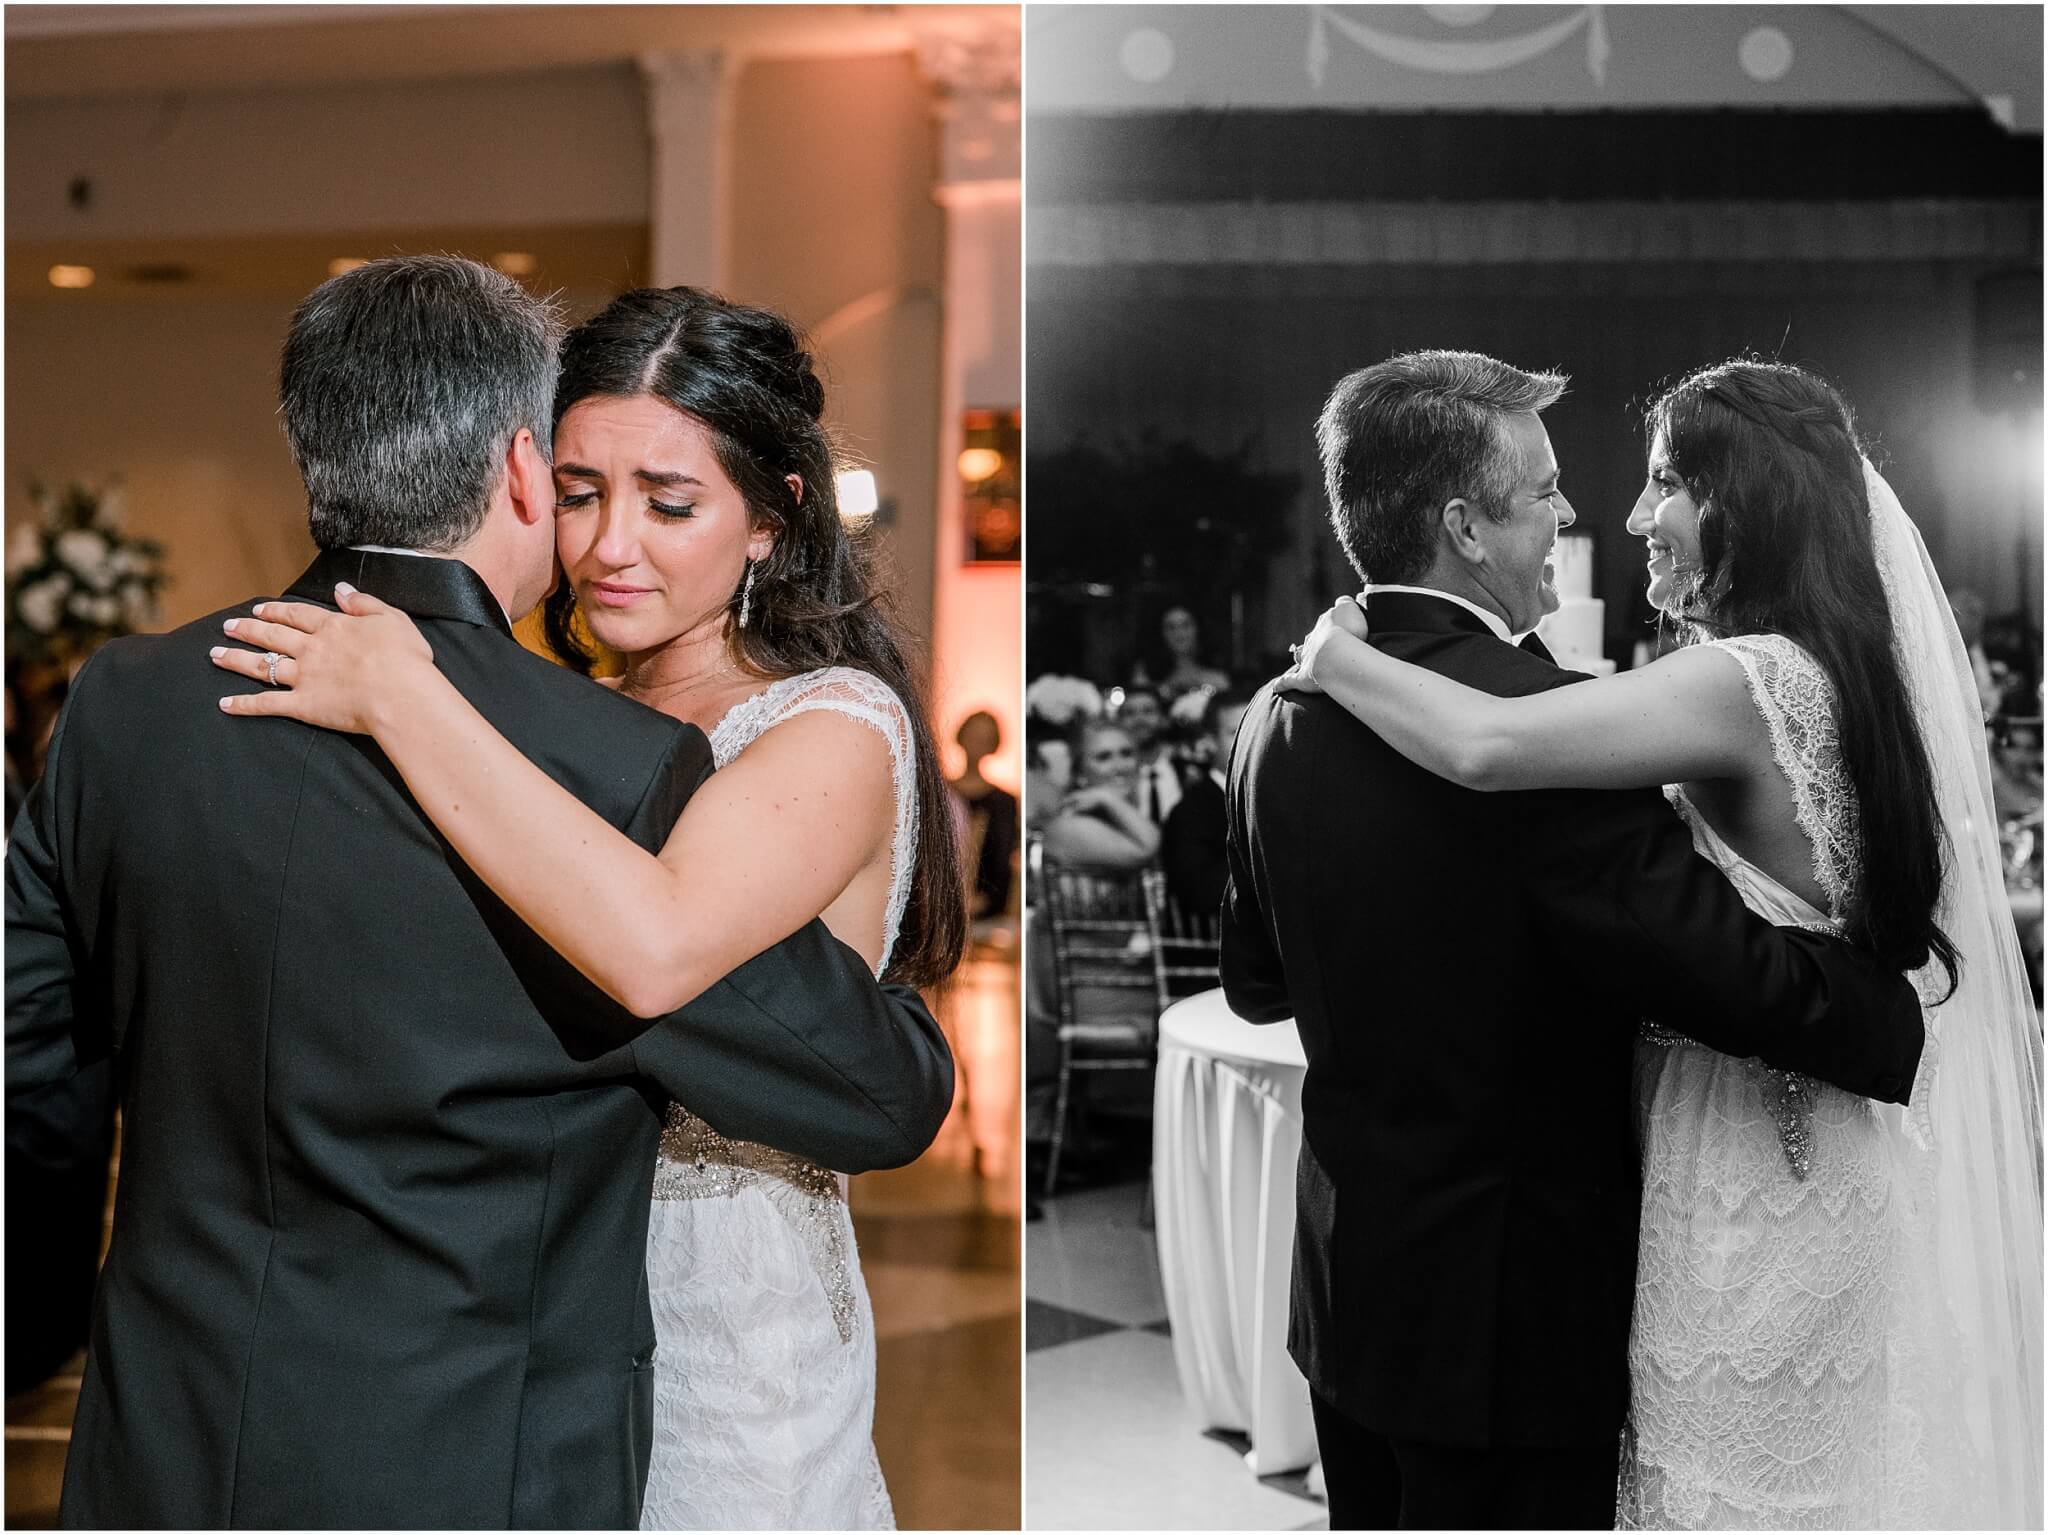 Emotional bride during father daughter dance